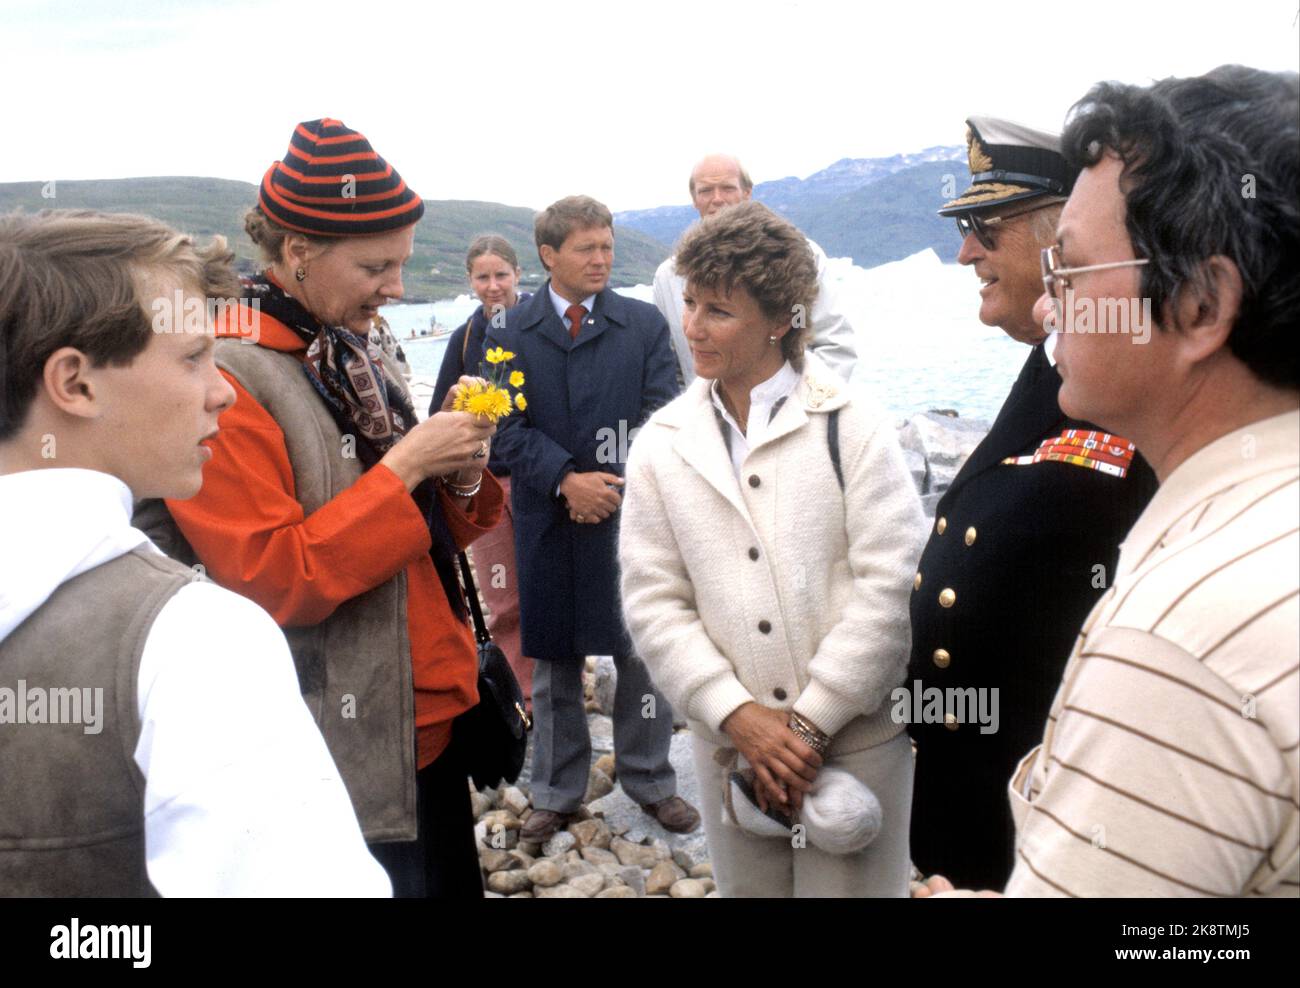 Greenland, Brattalid August 1982. King Olav and Crown Princess Sonja visit Greenland with Queen Margrethe, Prince Henrik, the children Crown Prince Frederik, Prince Joachim of Denmark and President Vigdis Finnbogadottir. Here during the tour at Brattalid (t.v.) Queen Margrethe with flowers, Crown Princess Sonja and King Olav. Photo: Paul Owesen NTB / NTB Stock Photo